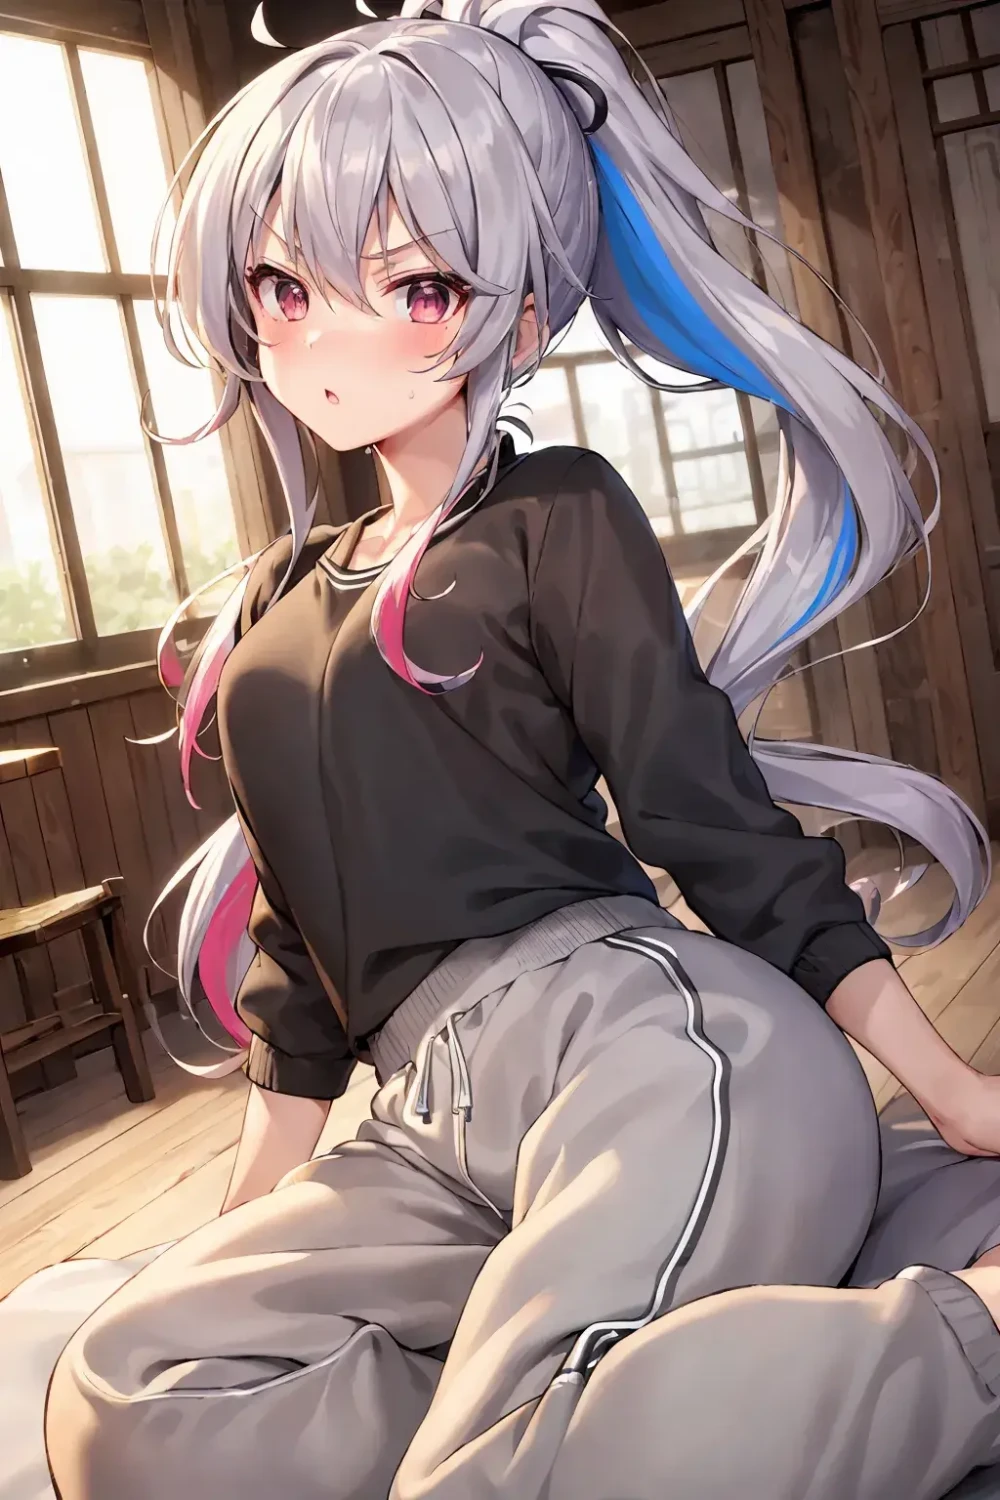 ponytail-anime-style-all-ages-2